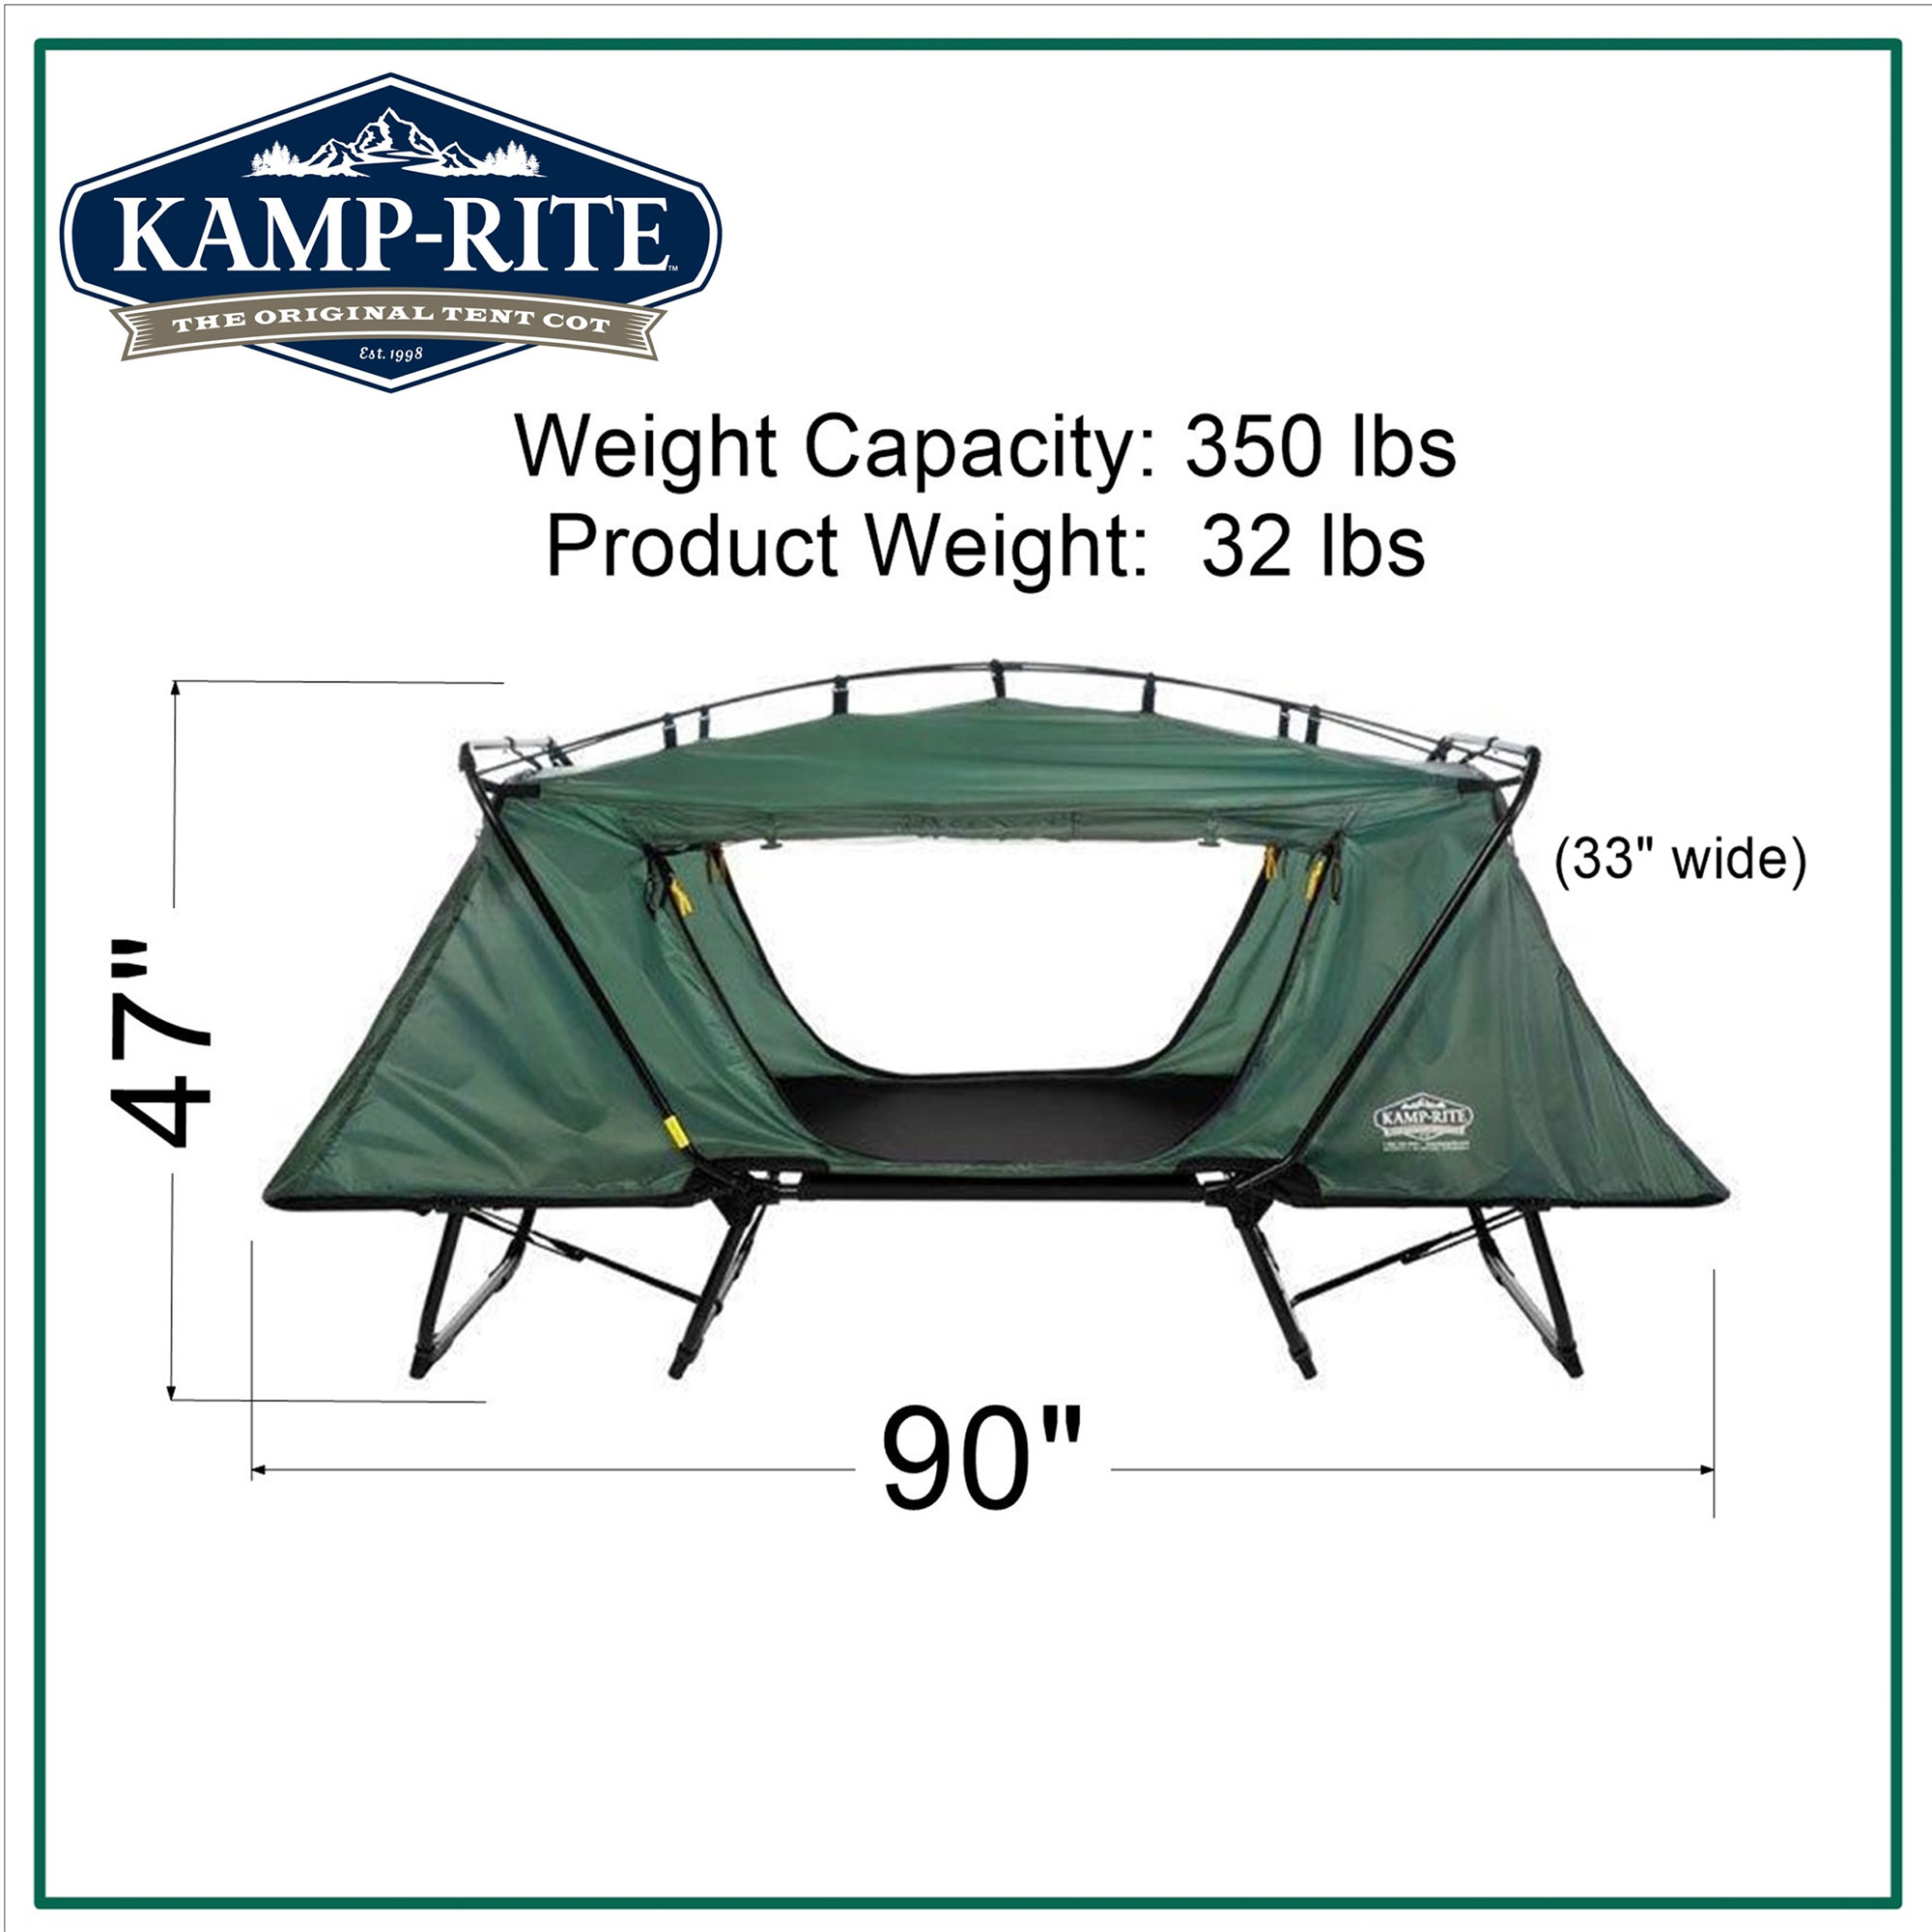 Kamp-Rite Oversized Quick Setup 1 Person Cot, Chair, & Tent w/Domed Top - image 2 of 8